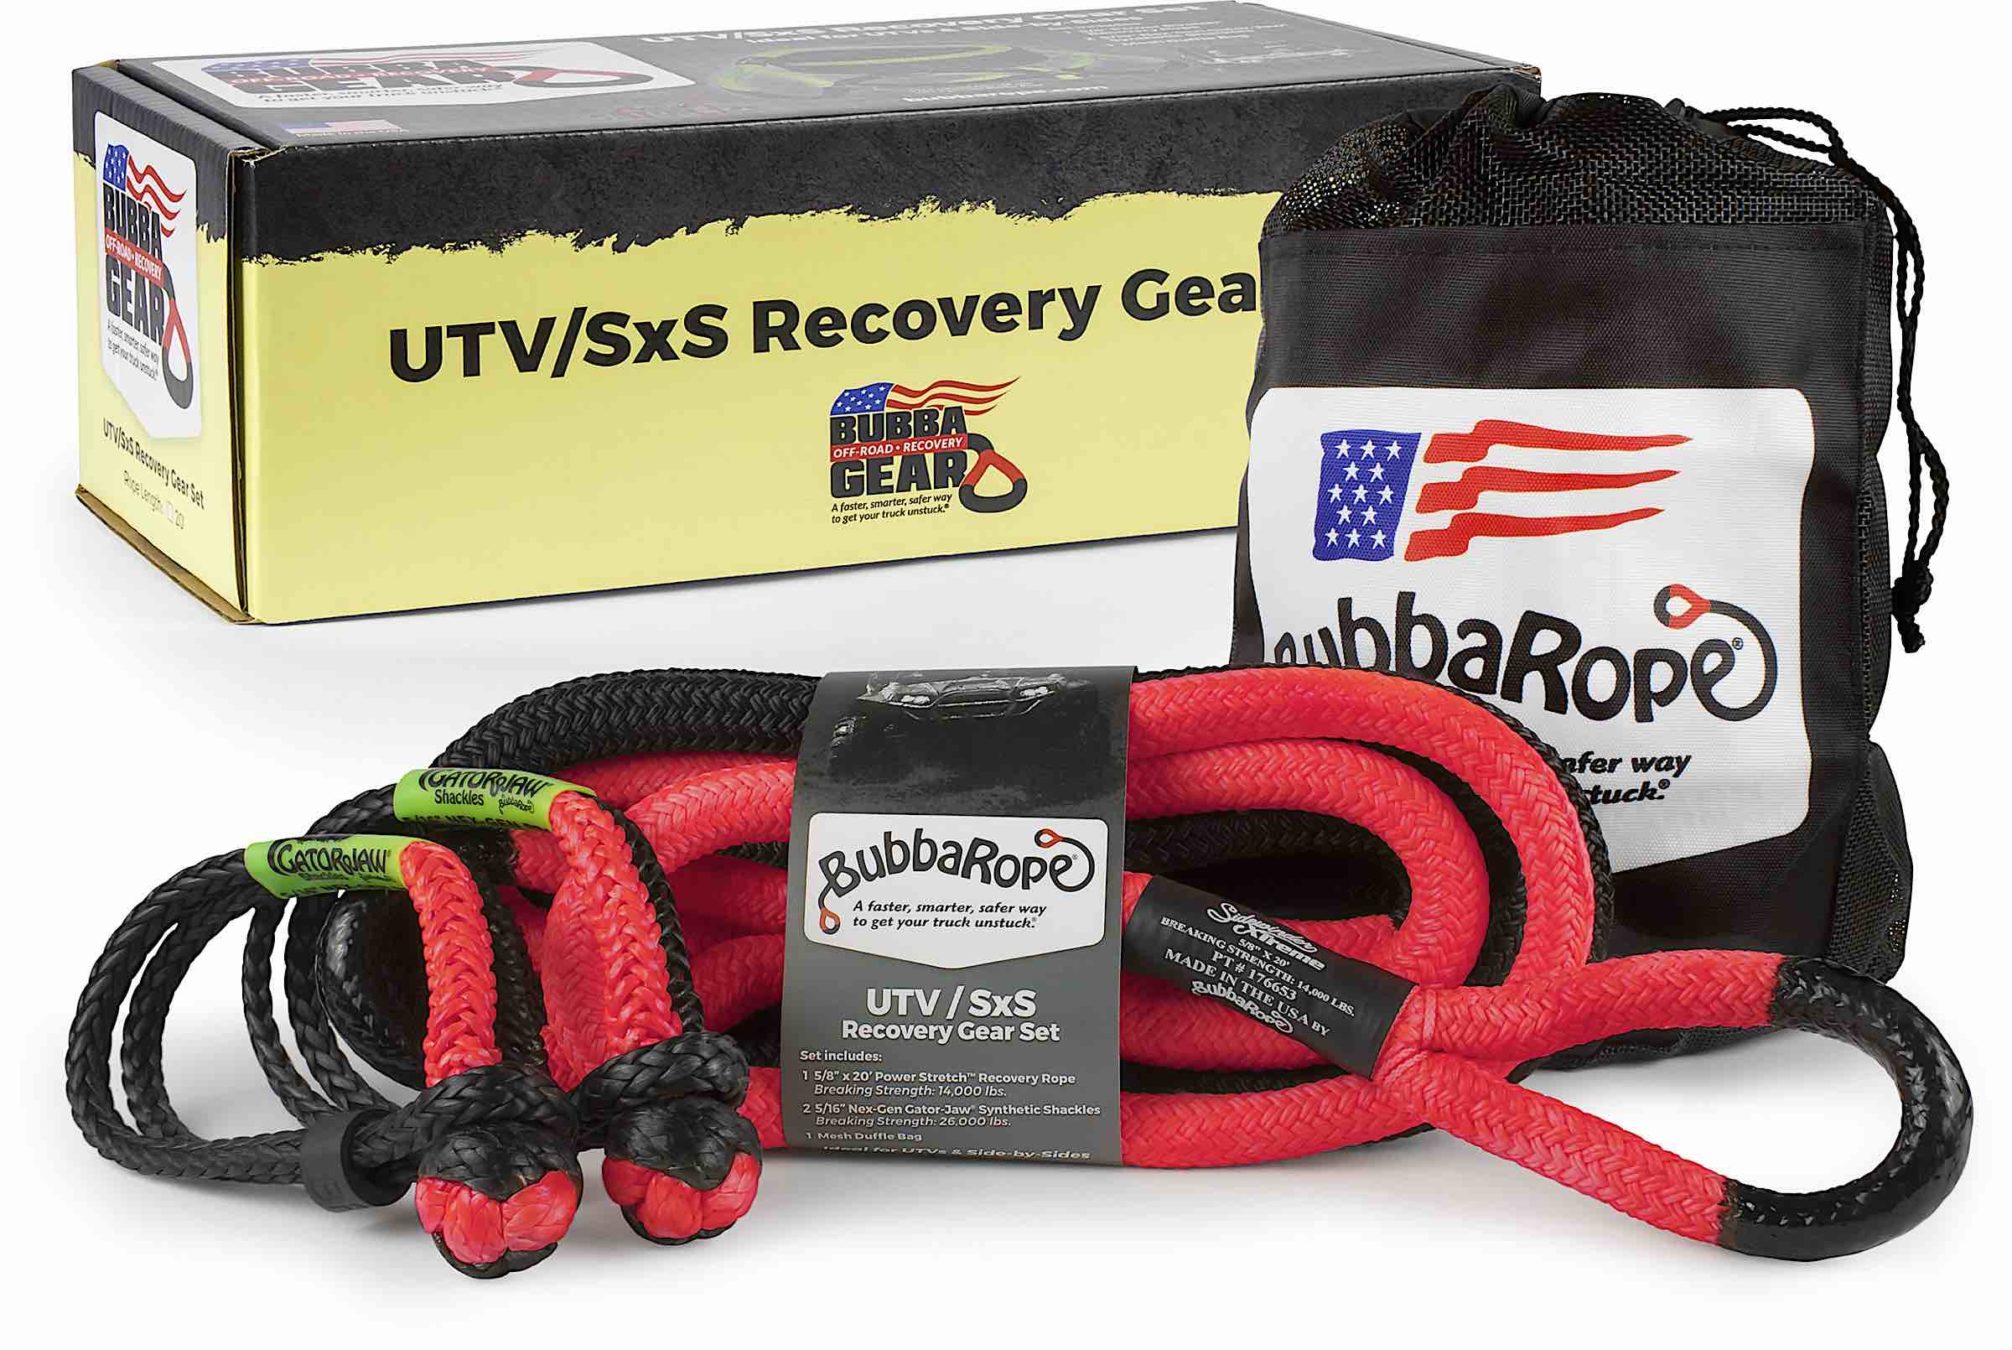 Bubba Off-Road Recovery Gear